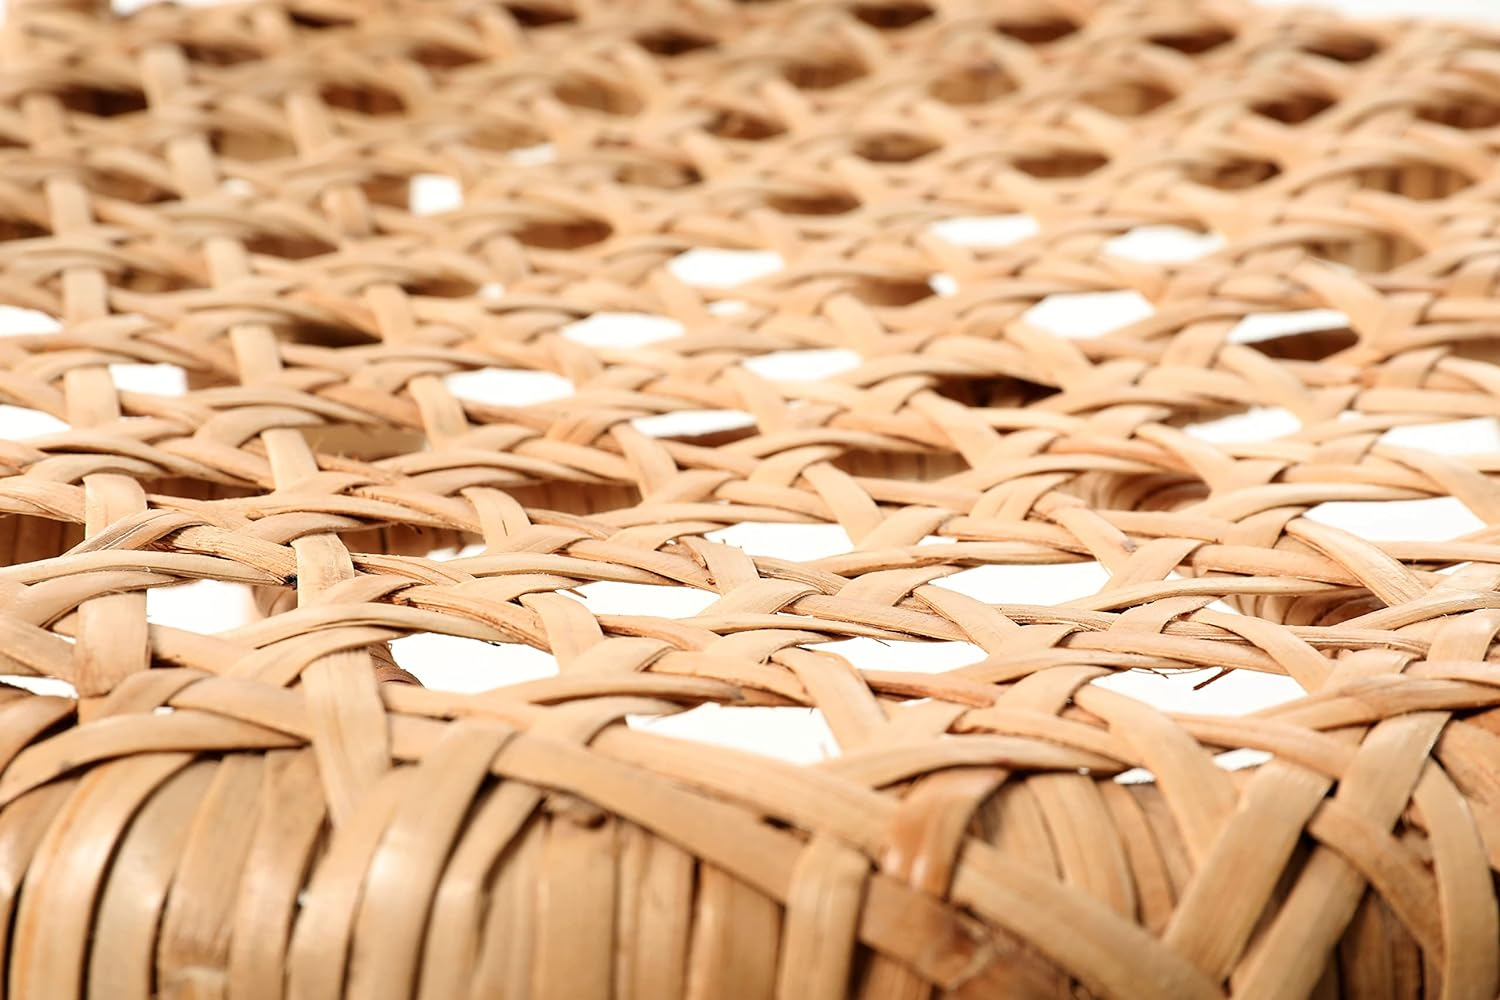 Artistry in Furniture: Wicker Seat Weaving and the Contemporary Credenza Revival